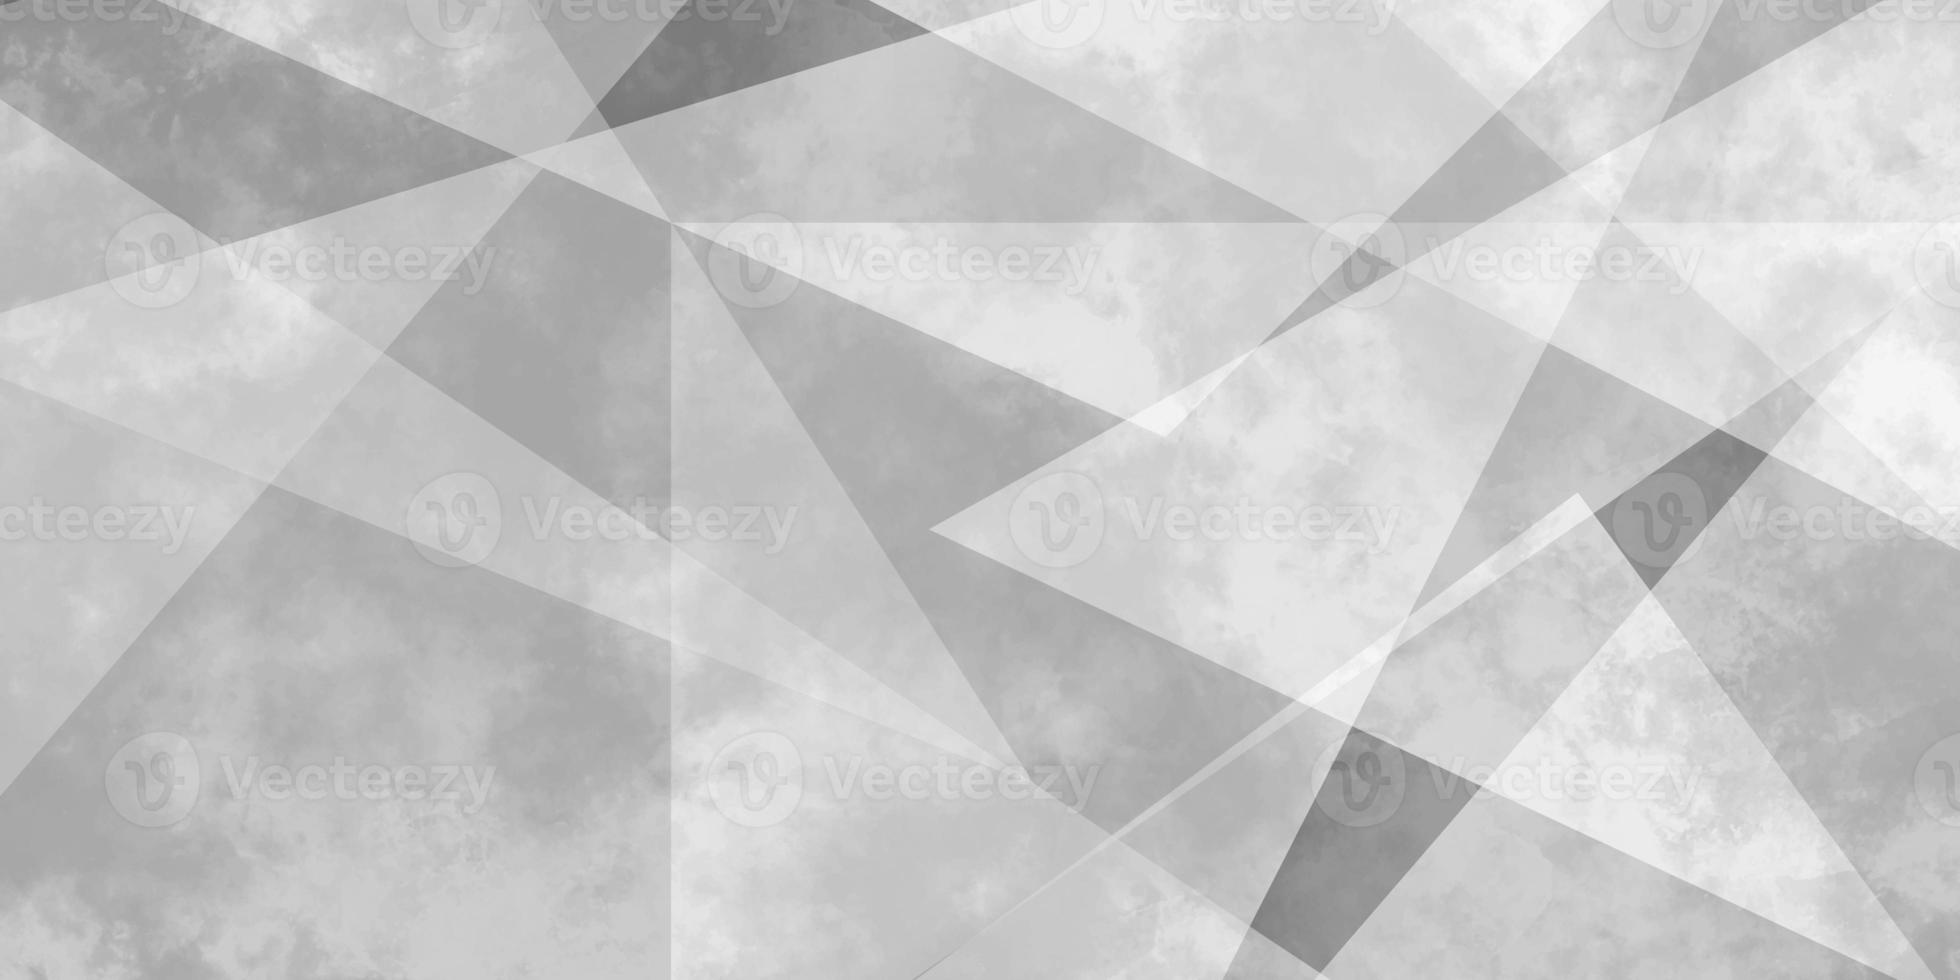 abstract geometric background with triangles. white and grey background. space design concept. textured white material in triangle shapes in random decorative web layout or poster, banner. photo